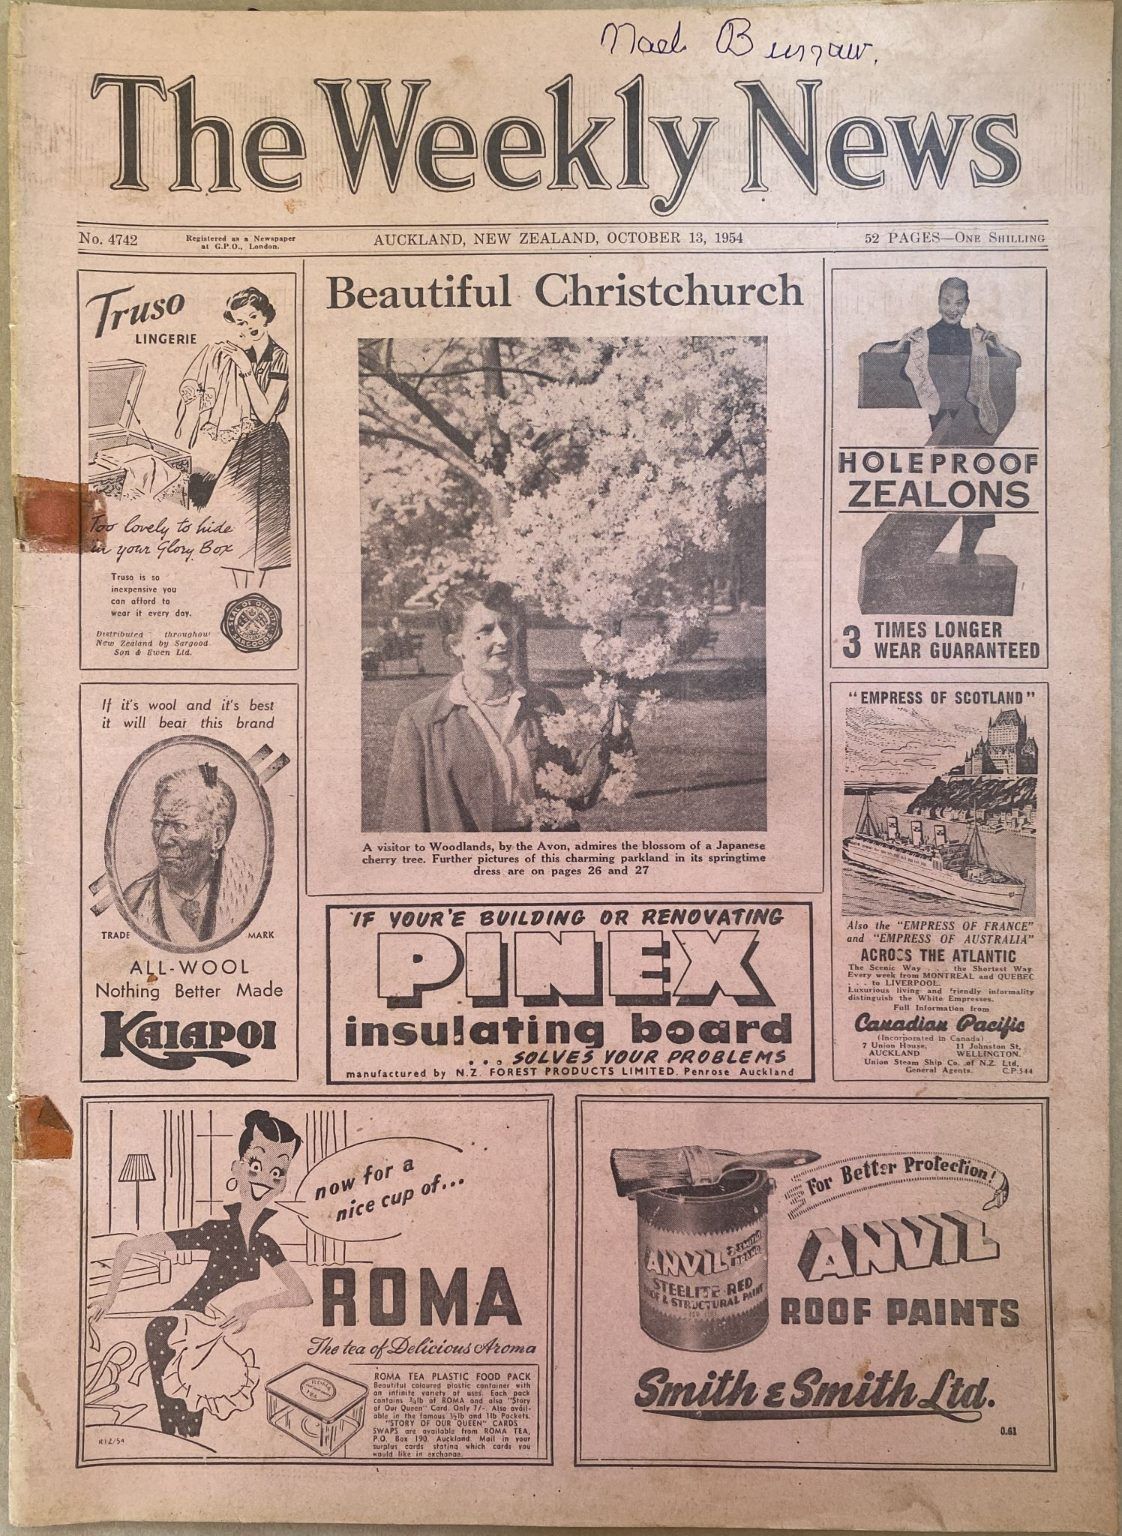 OLD NEWSPAPER: The Weekly News - No. 4742, 13 October 1954